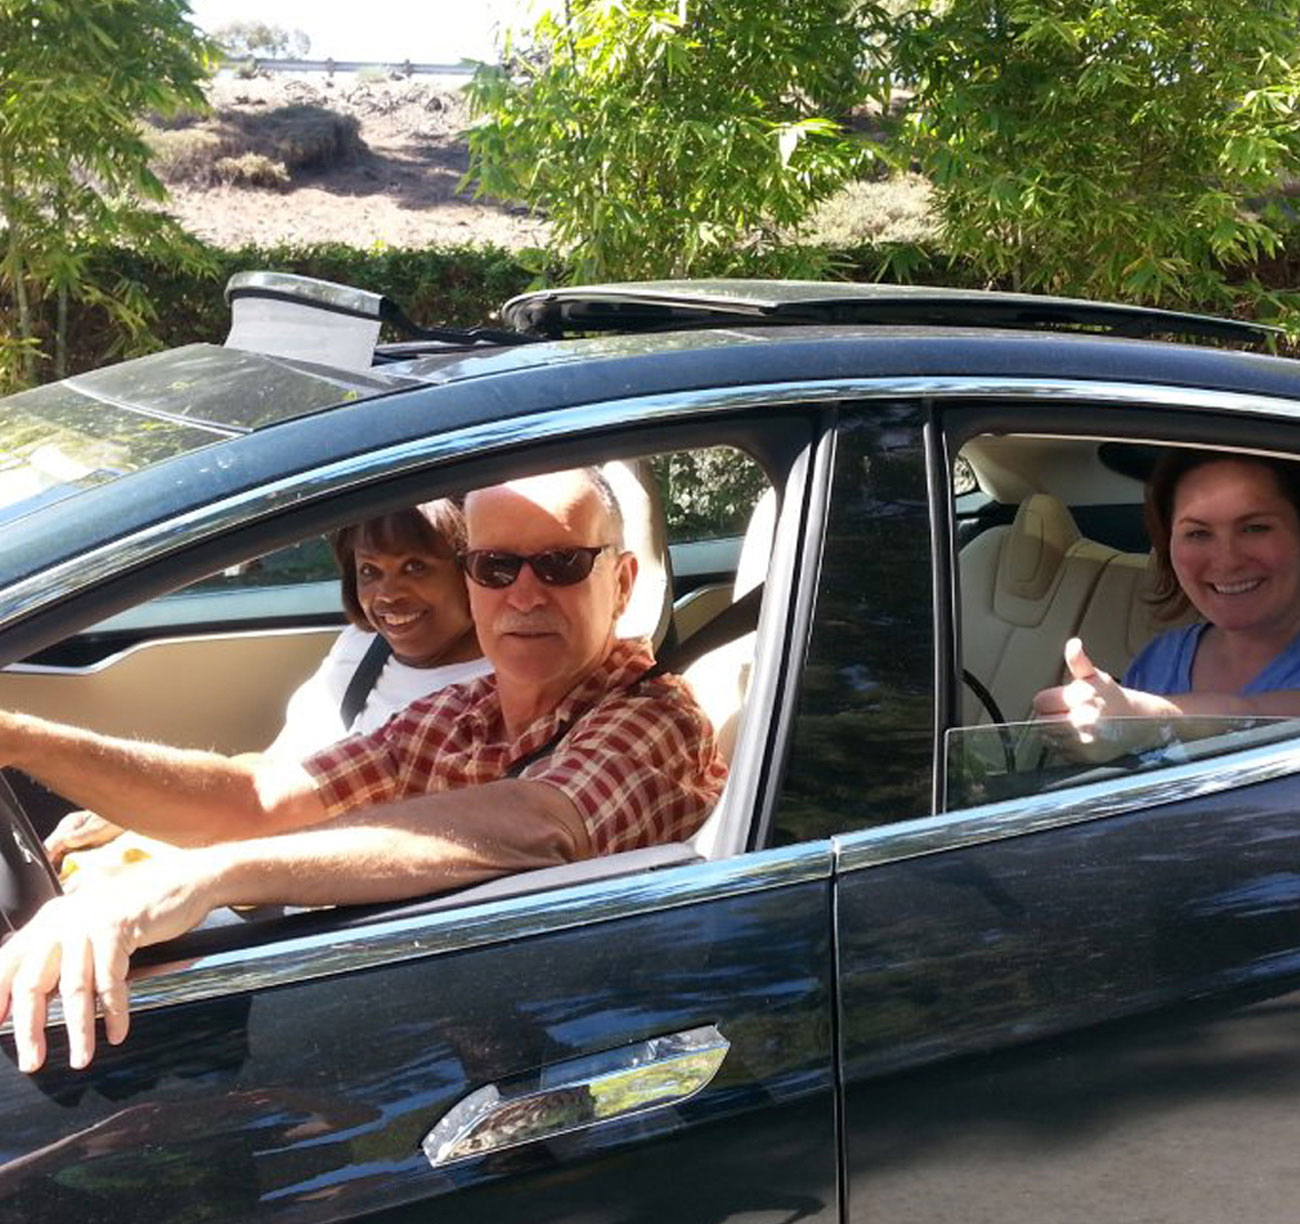 Three individuals in a car, the person in the backseat is giving a thumbs up.